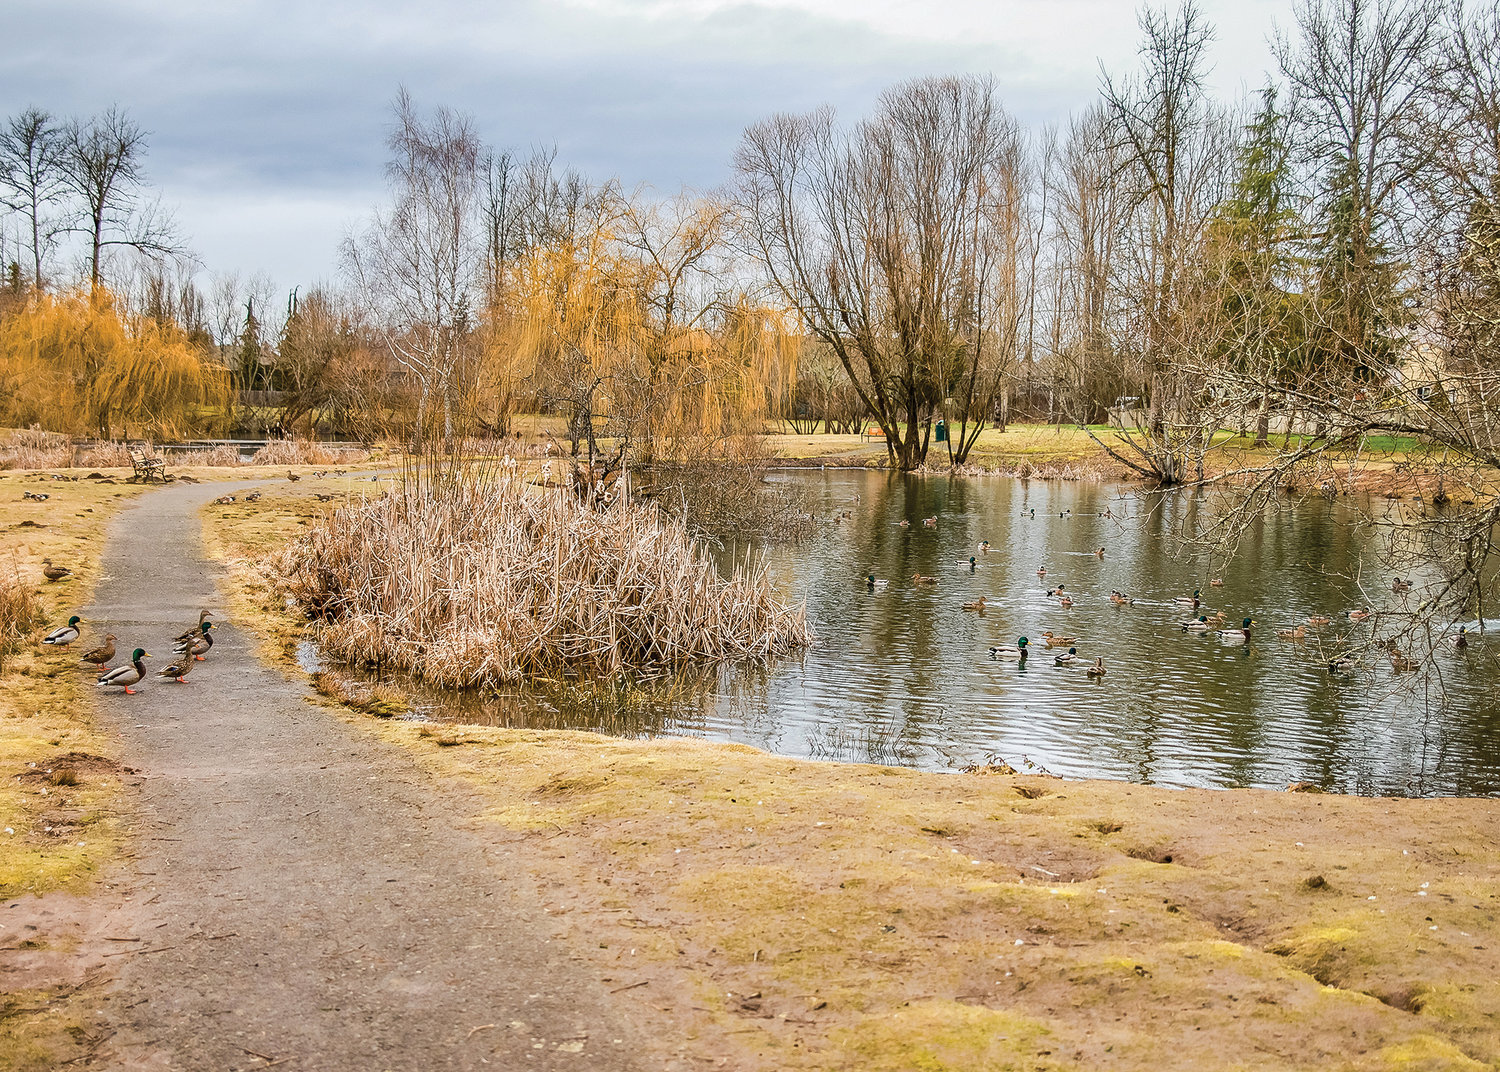 The duck ponds at Florence Park. The park includes numerous benches and trails as seen on Thursday, March 9.